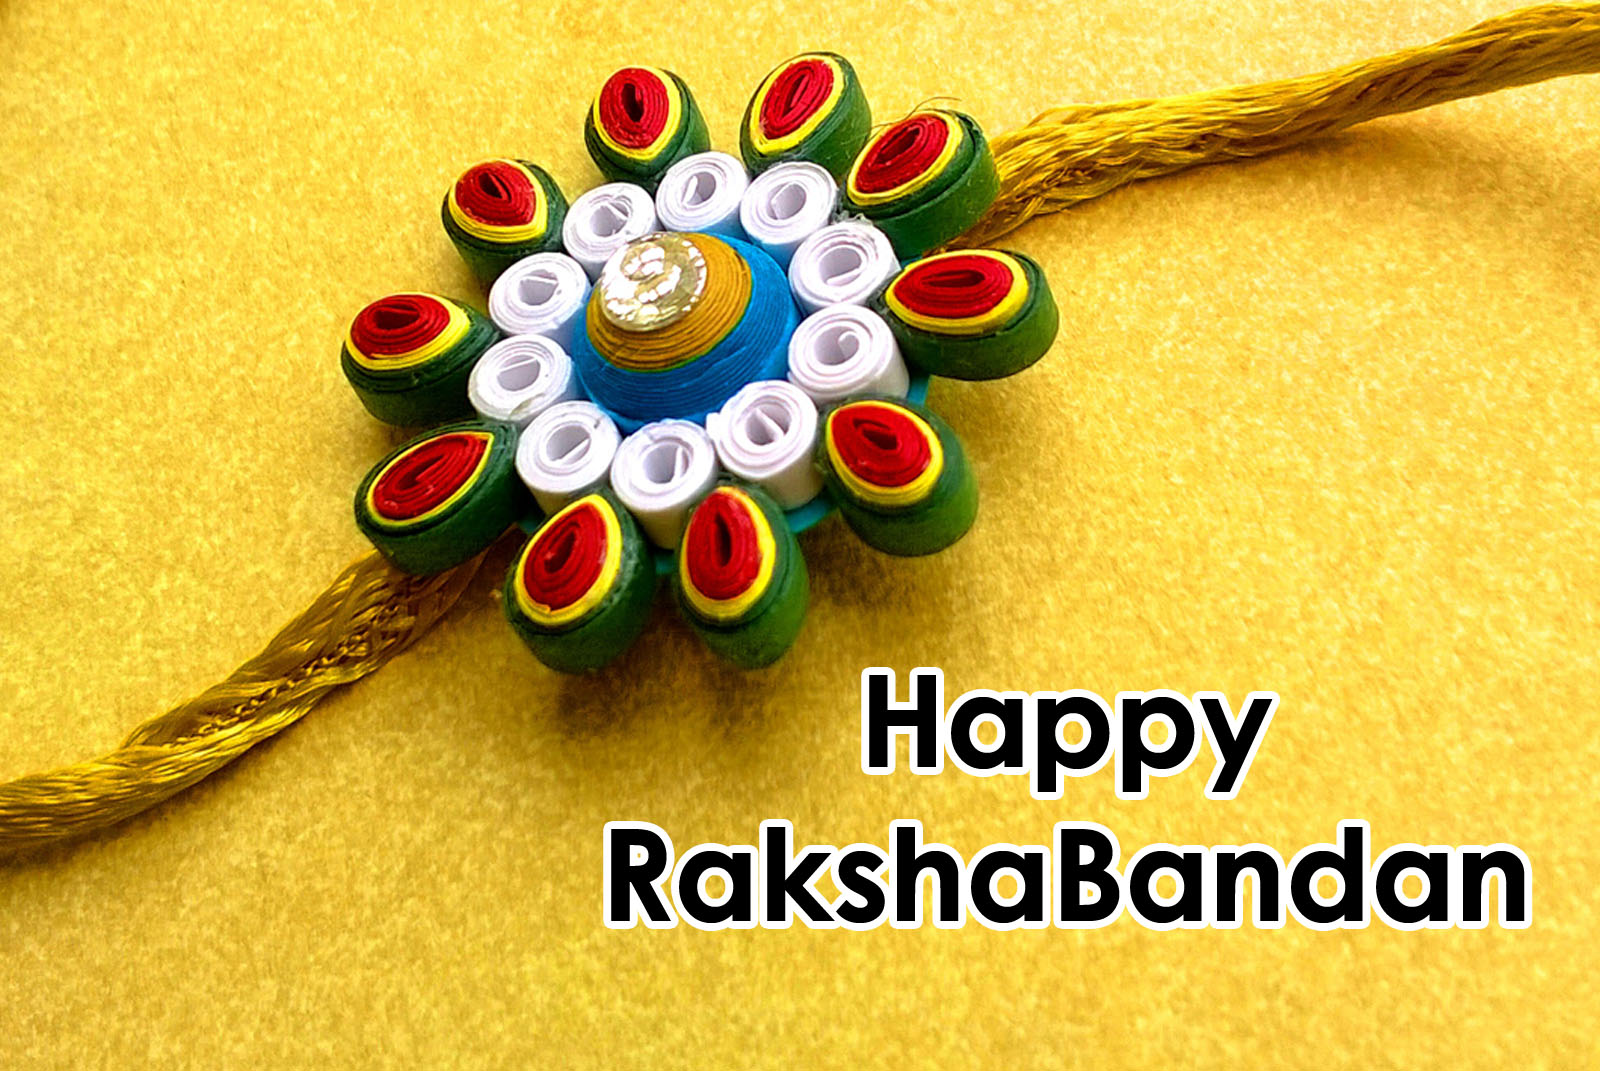 A Stunning Compilation of 999+ Rakhi Images for Brothers in Full 4K Quality